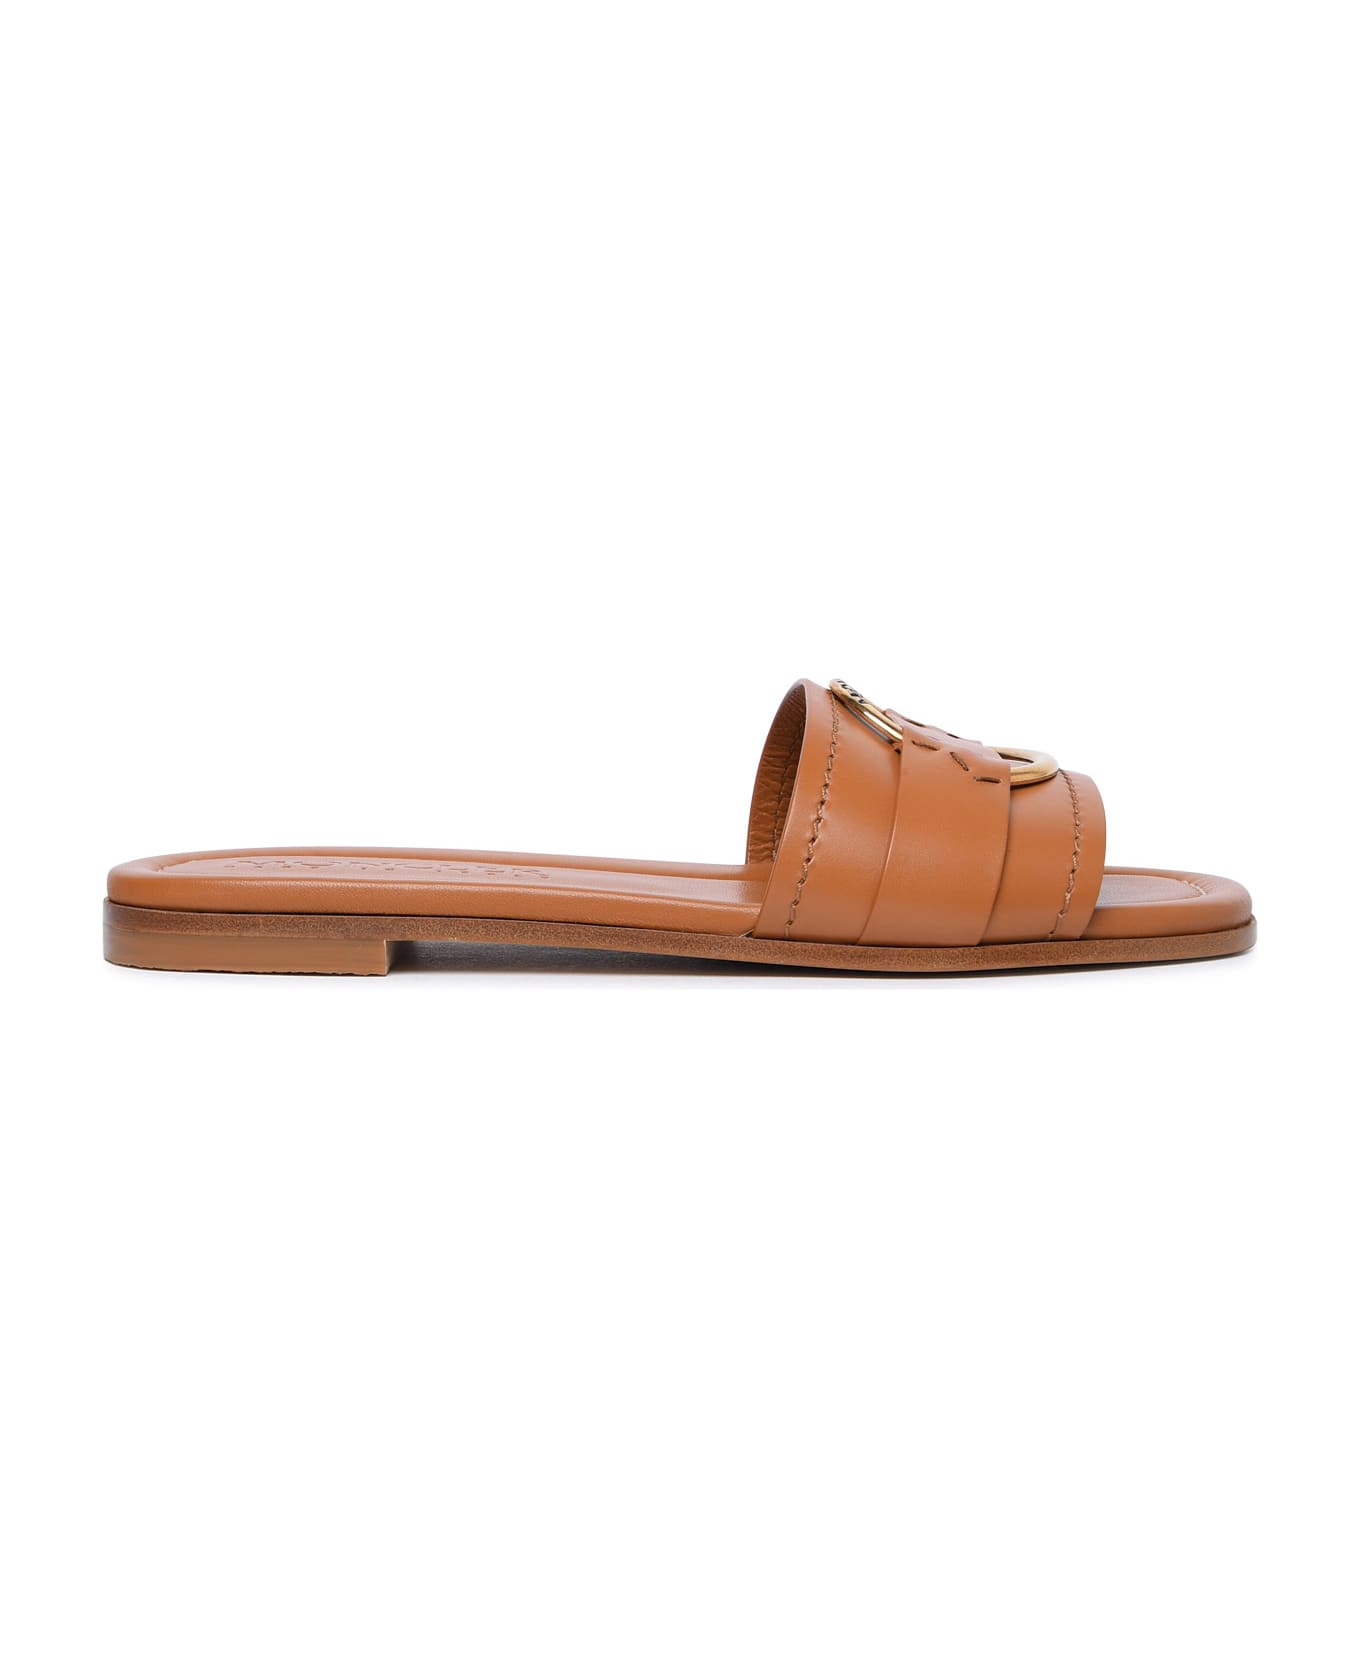 Moncler 'bell' Caramel Leather Slippers - Beige